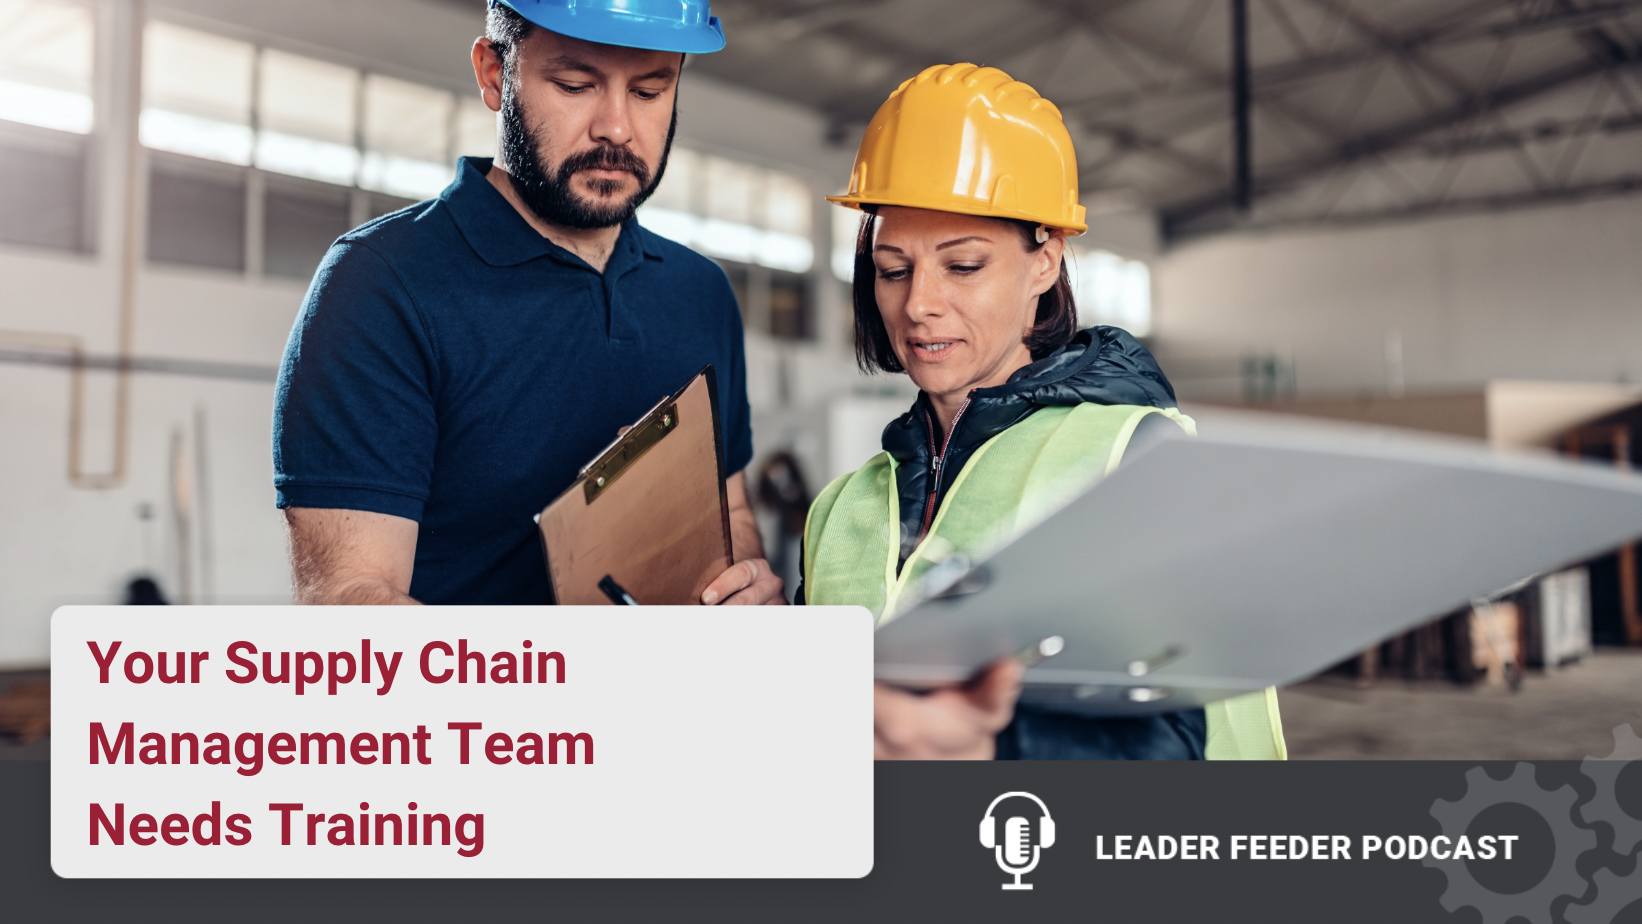 Supply chain management teams always need training. Which means, we must to take the time to build up the skills in your supply chain team. 